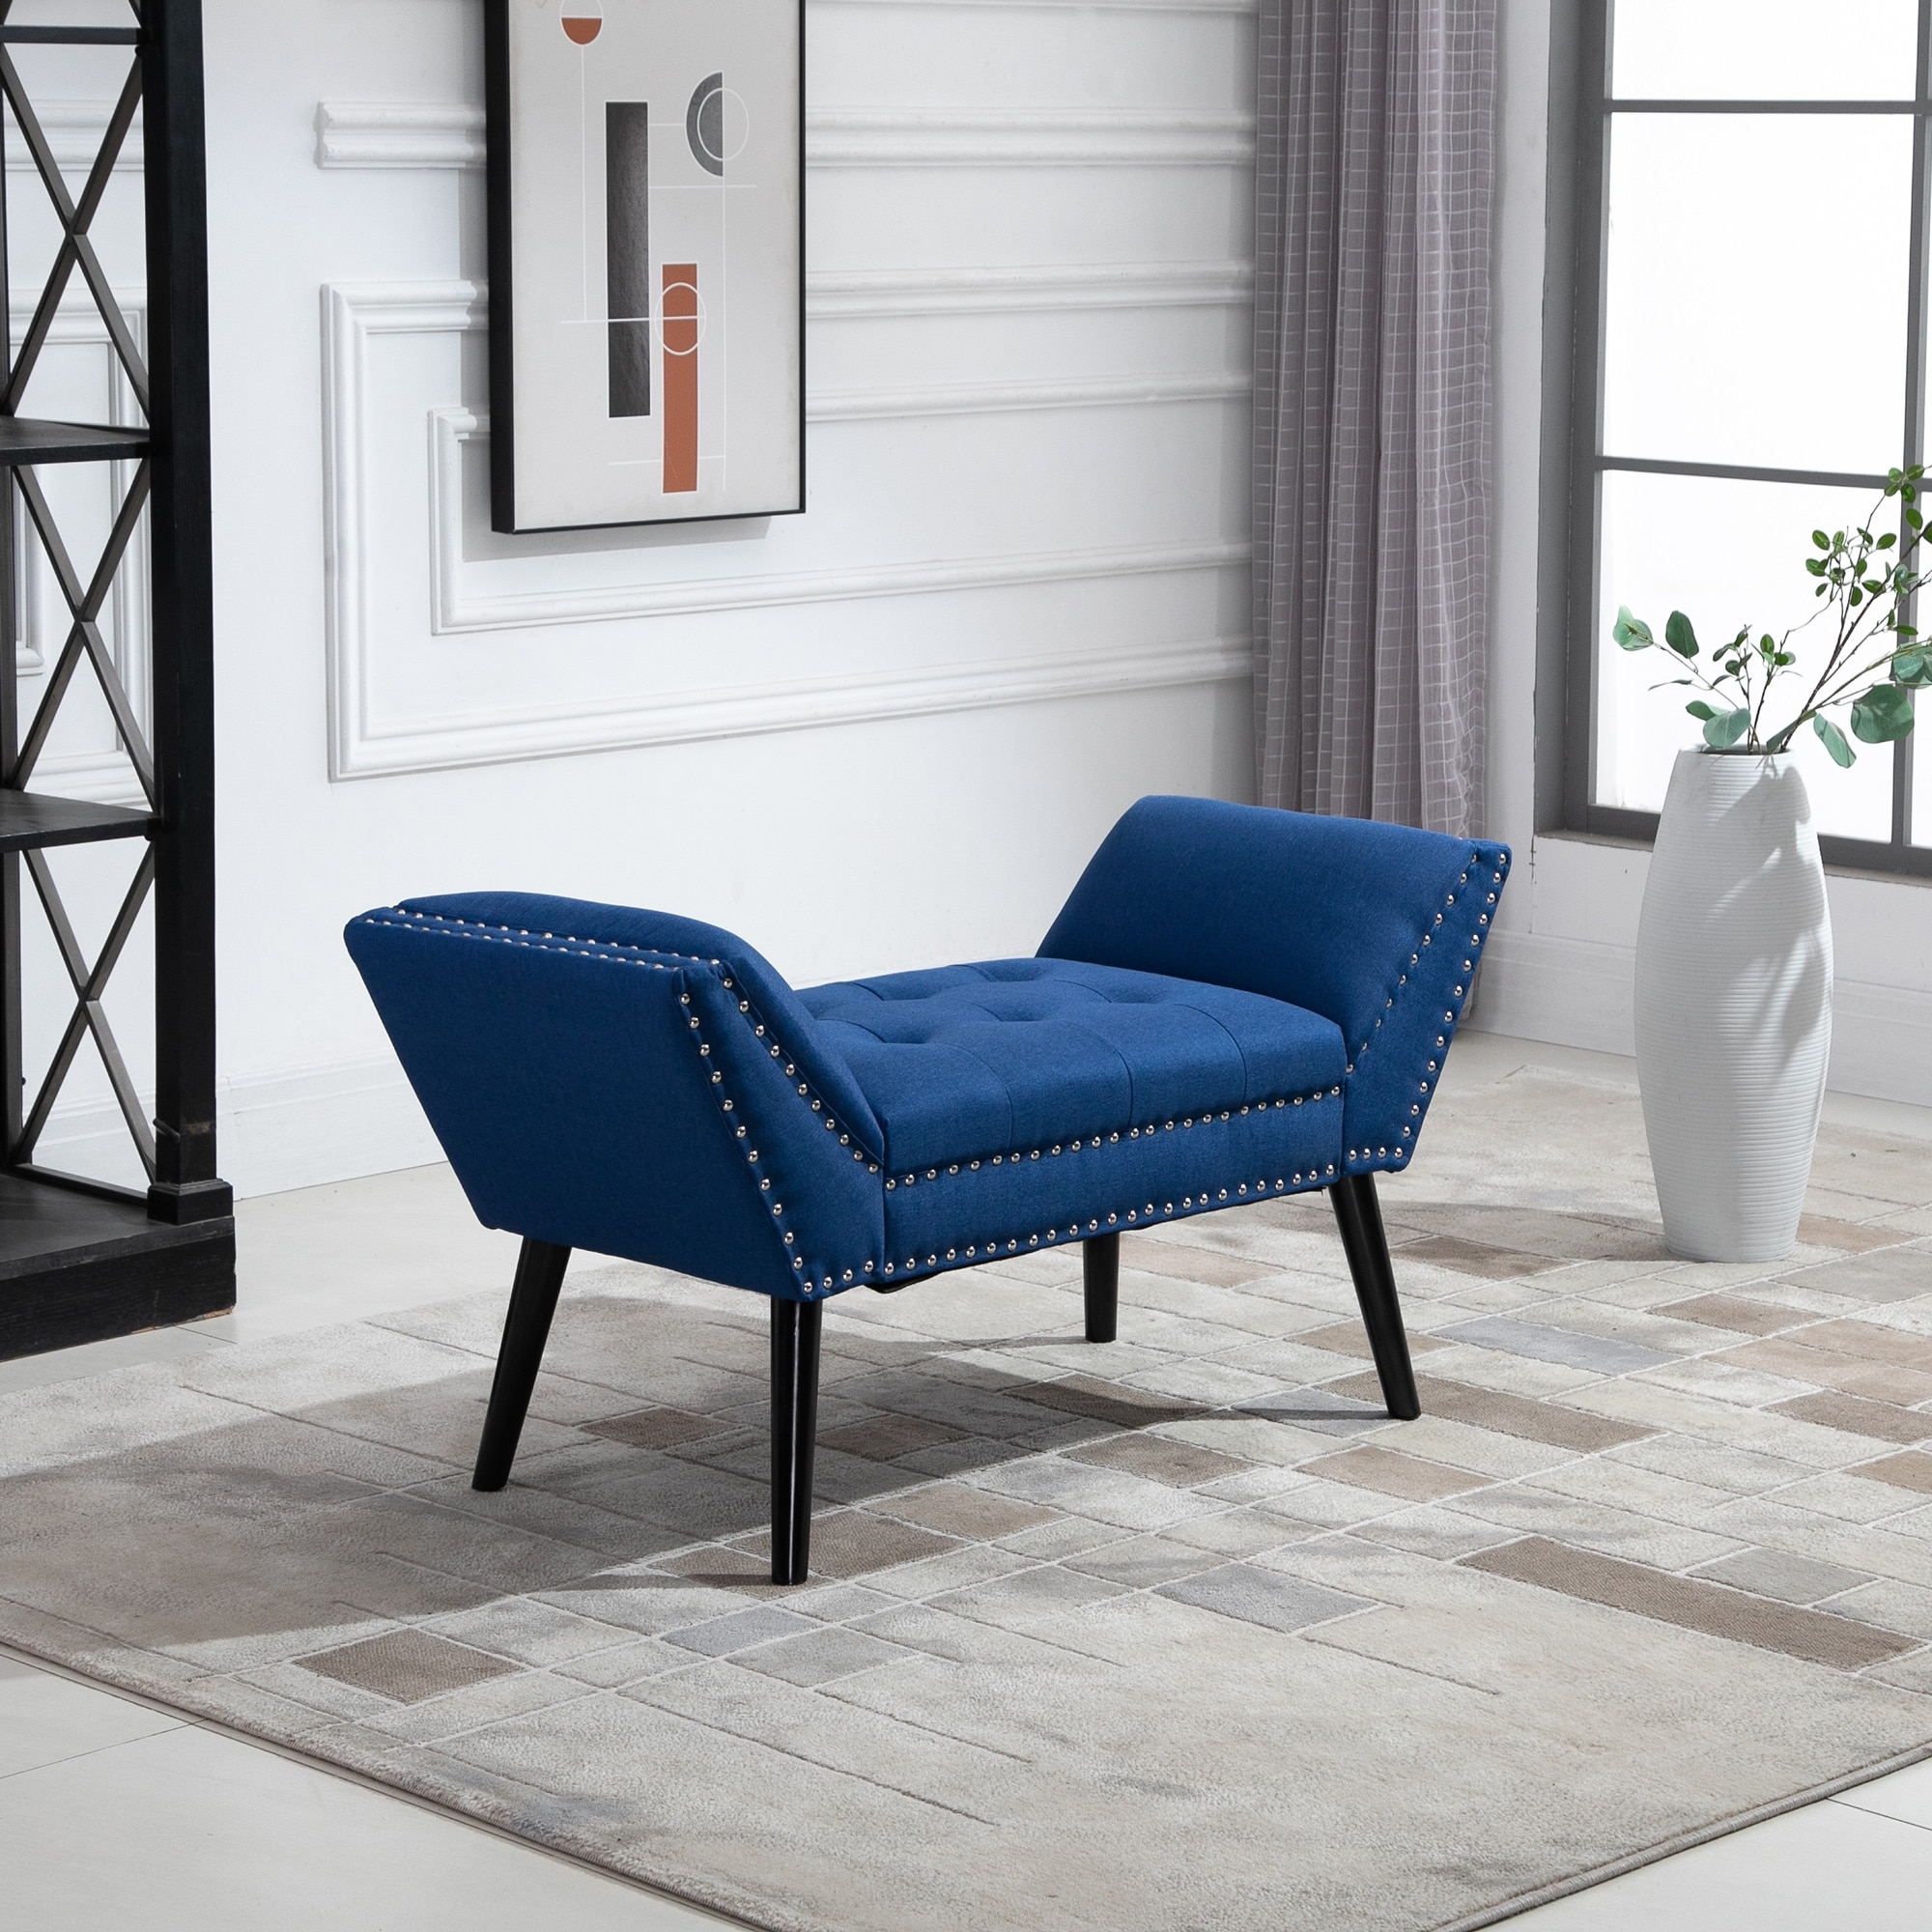 https://ak1.ostkcdn.com/images/products/is/images/direct/1fb2b01791e3b6f11293a2f756f43b7a2d8b053f/HOMCOM-Modern-Button-Tufted-Sitting-Bench-Accent-Fabric-Upholstered-Ottoman-for-Bedroom-or-Living-Room.jpg